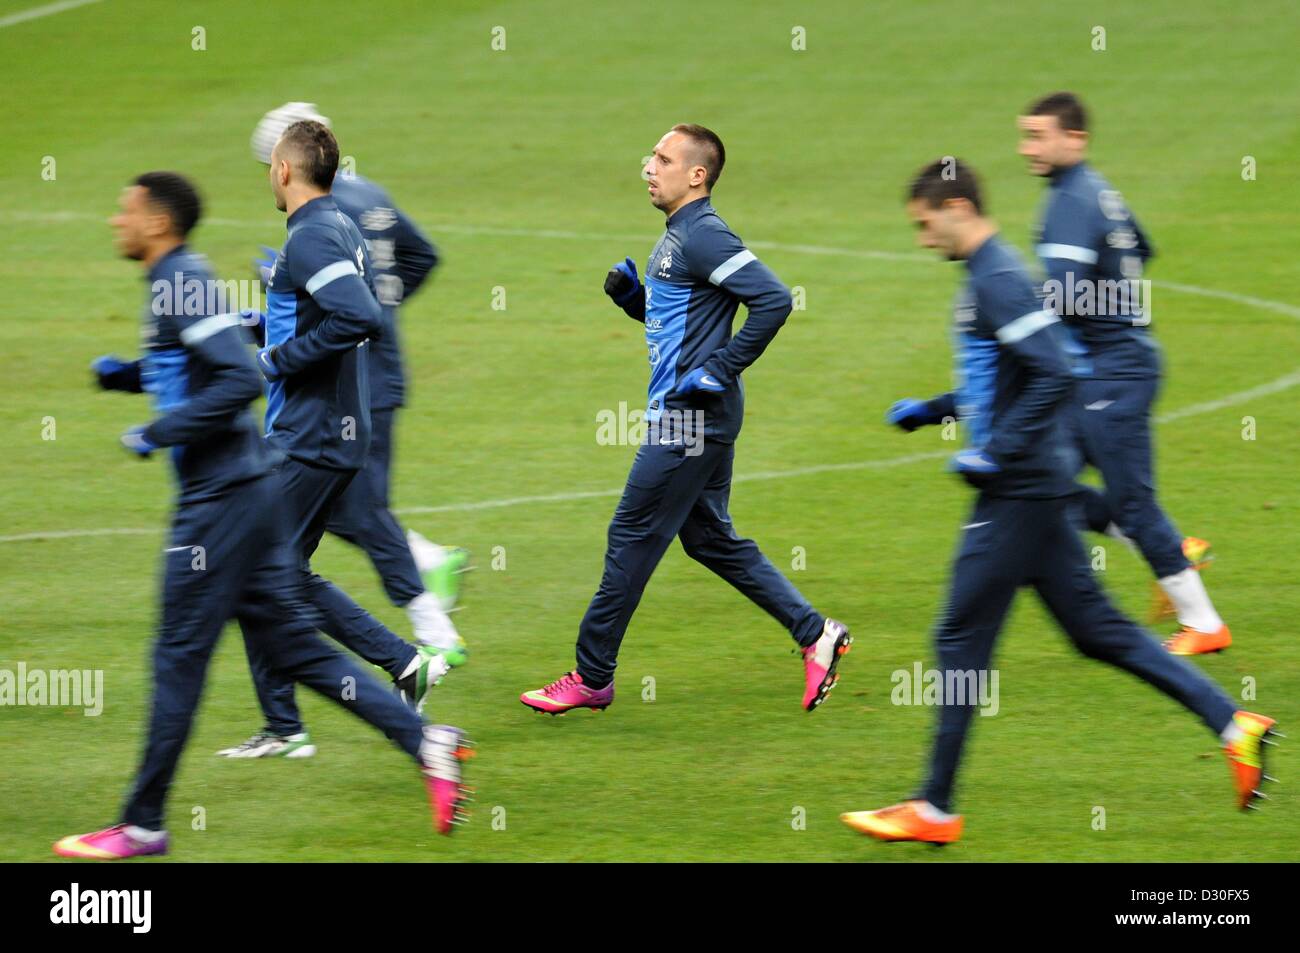 Paris, France. 5th February 2013. France's Frank Ribery (C) takes part in French national soccer team practice at the Stade de France in Paris, France, 05 February 2013. German will play France on 06 February 2013. Photo: ANDREAS GEBERT/dpa/Alamy Live News Stock Photo